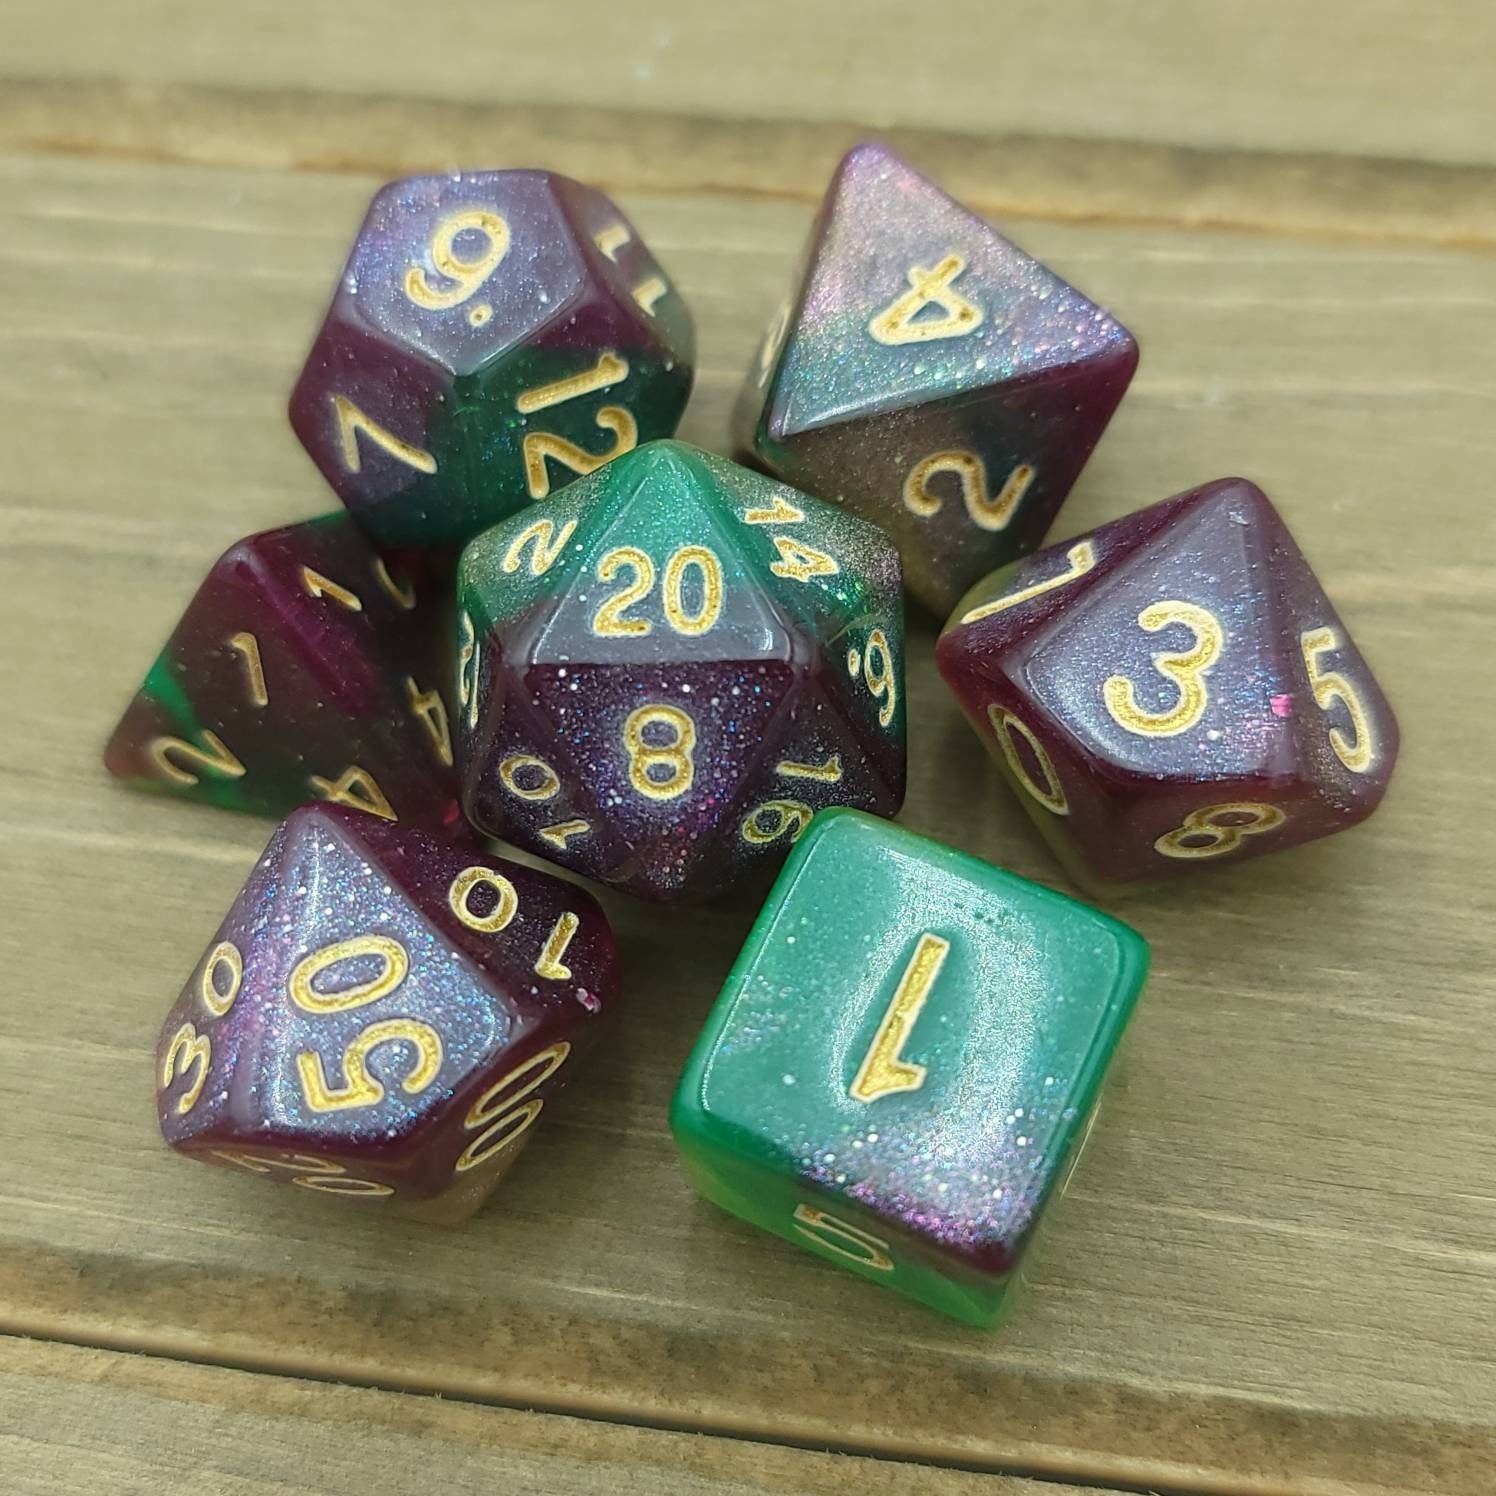 Fat Tuesday | RPG Dice Set| RPG Dice | Polyhedral Dice Set | Dungeons and Dragons | DnD Dice Set | Gaming Dice Set